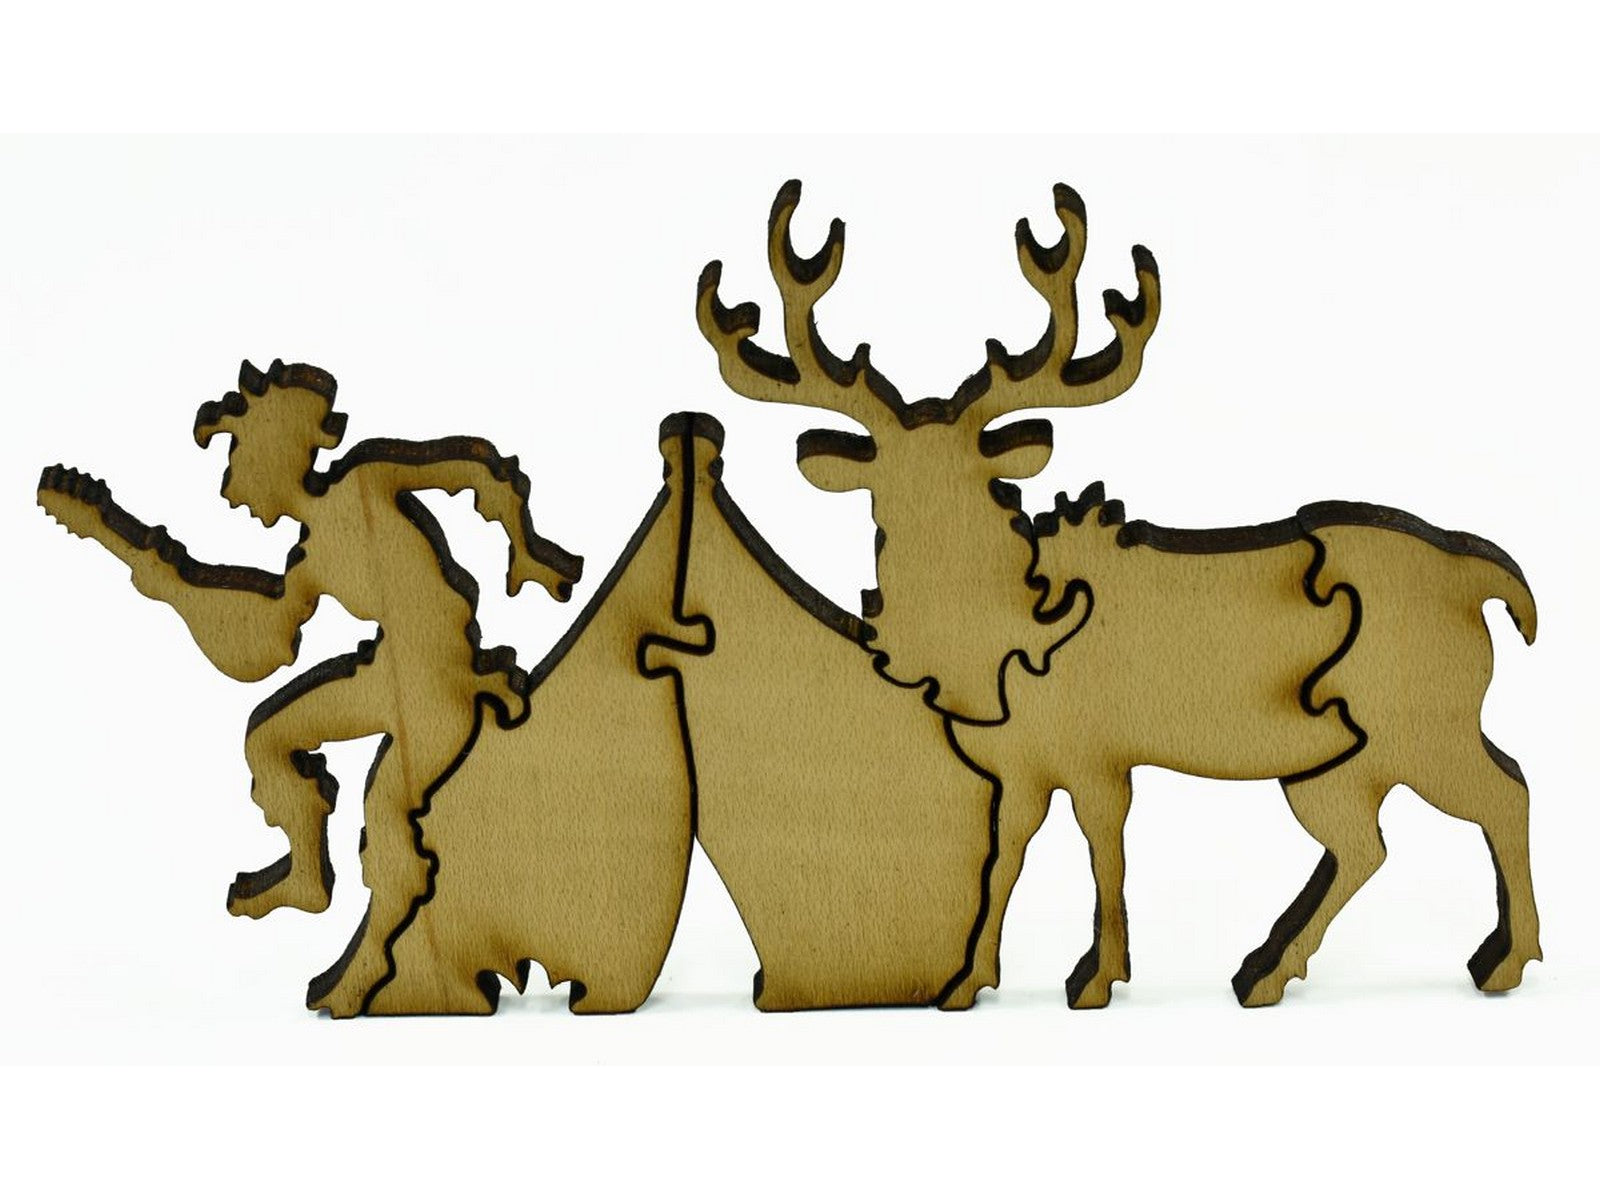 A closeup of pieces in the shape of an elk and a campsite.